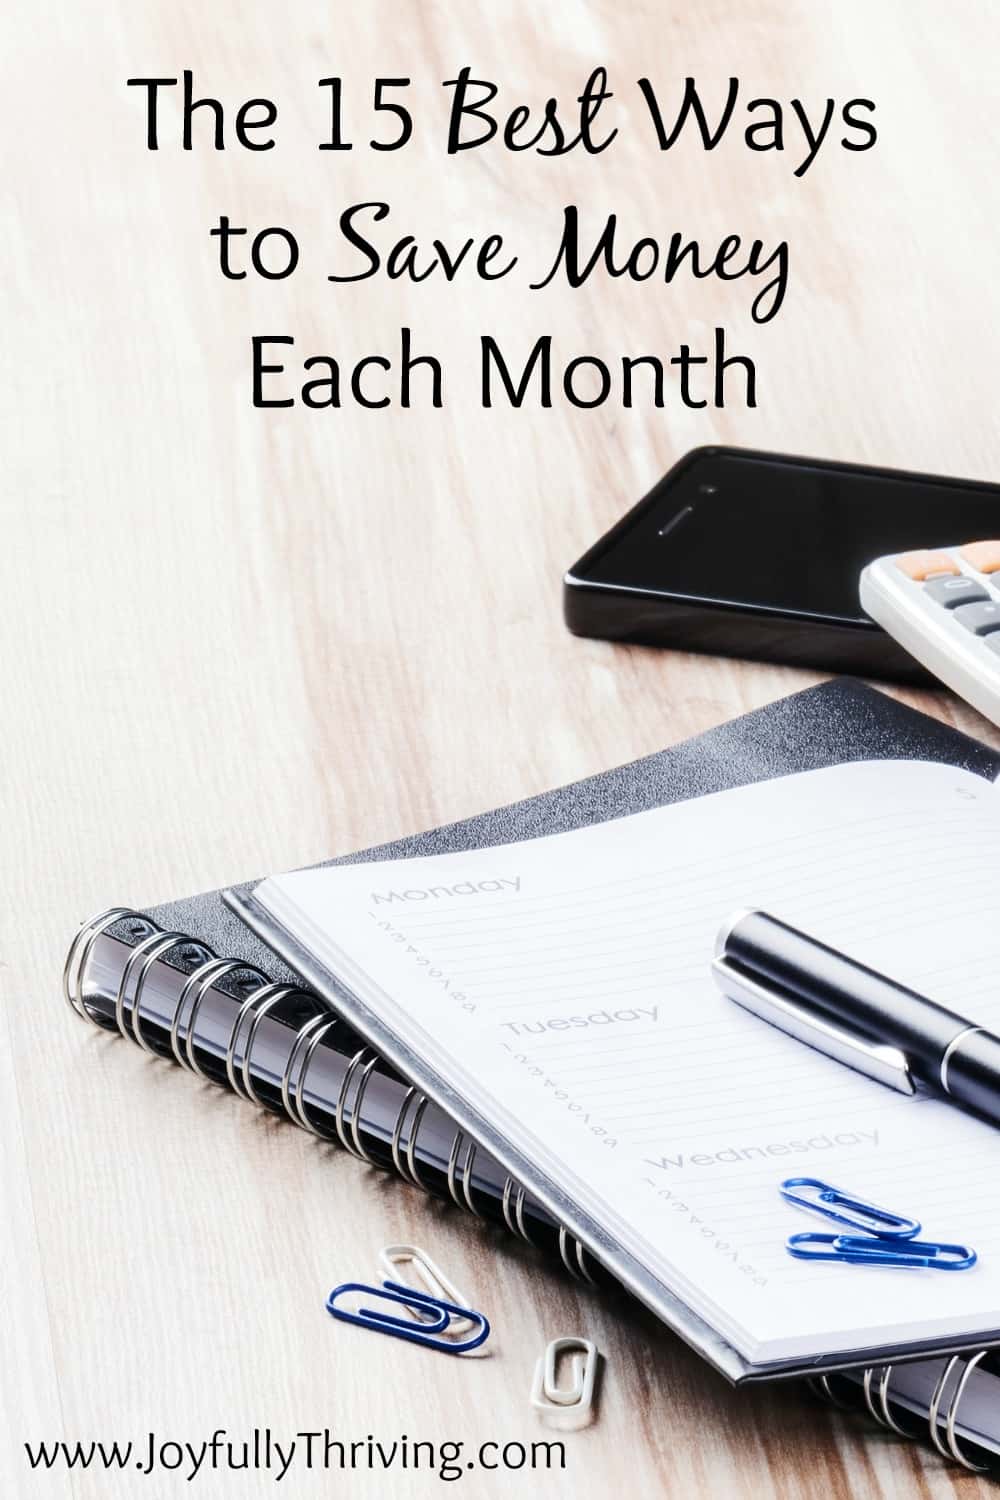 Great list of ways to save month each month. Now to just start doing them all...